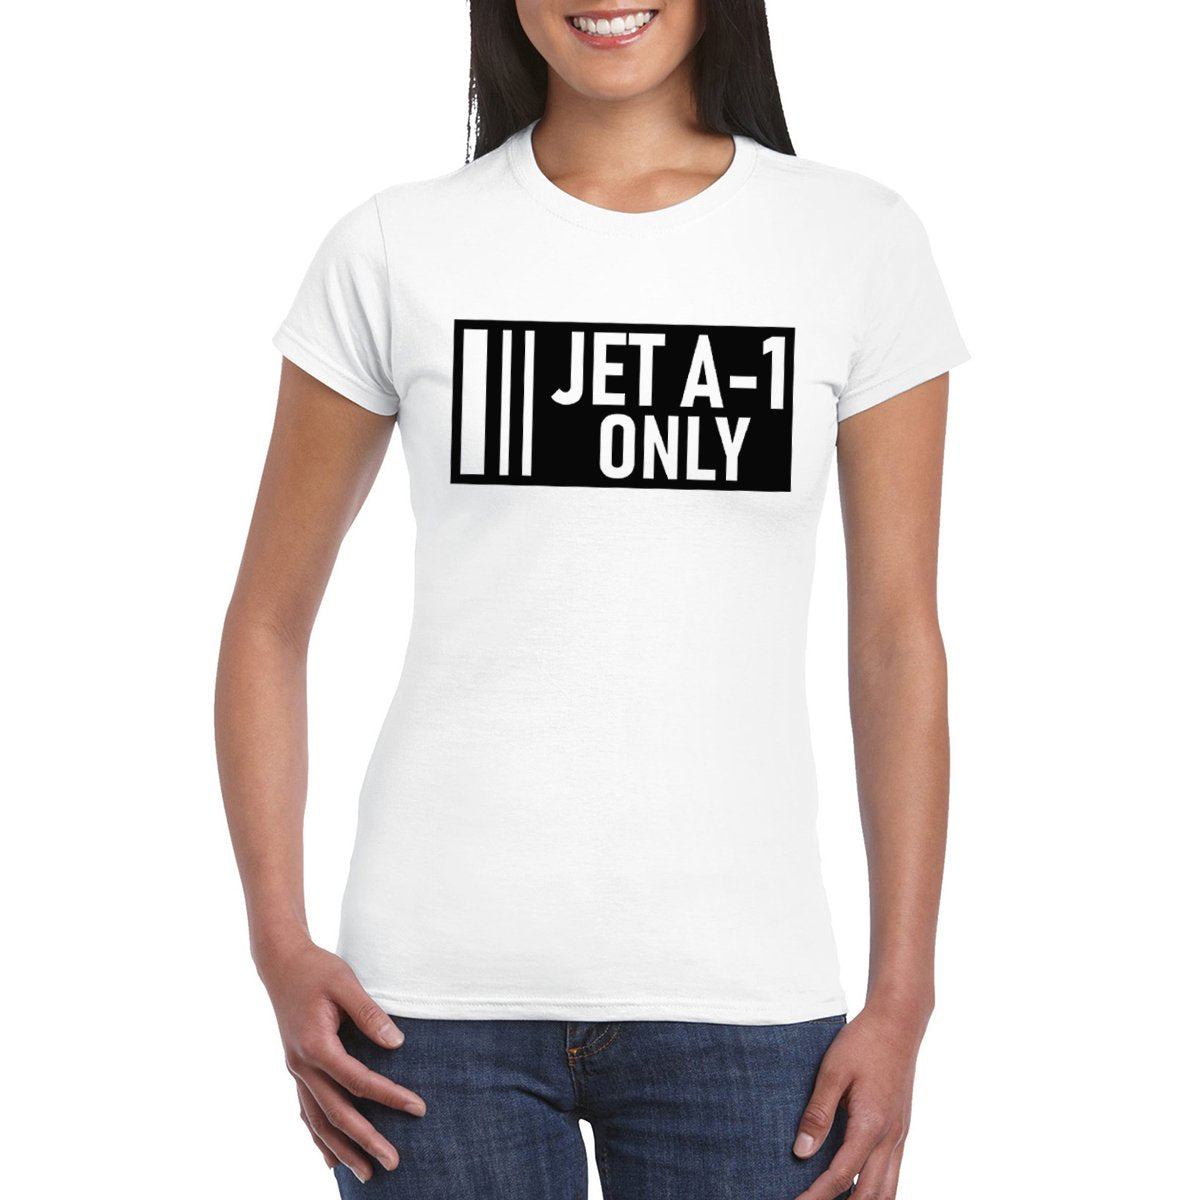 JET A-1 ONLY Women's Semi-Fitted T-Shirt